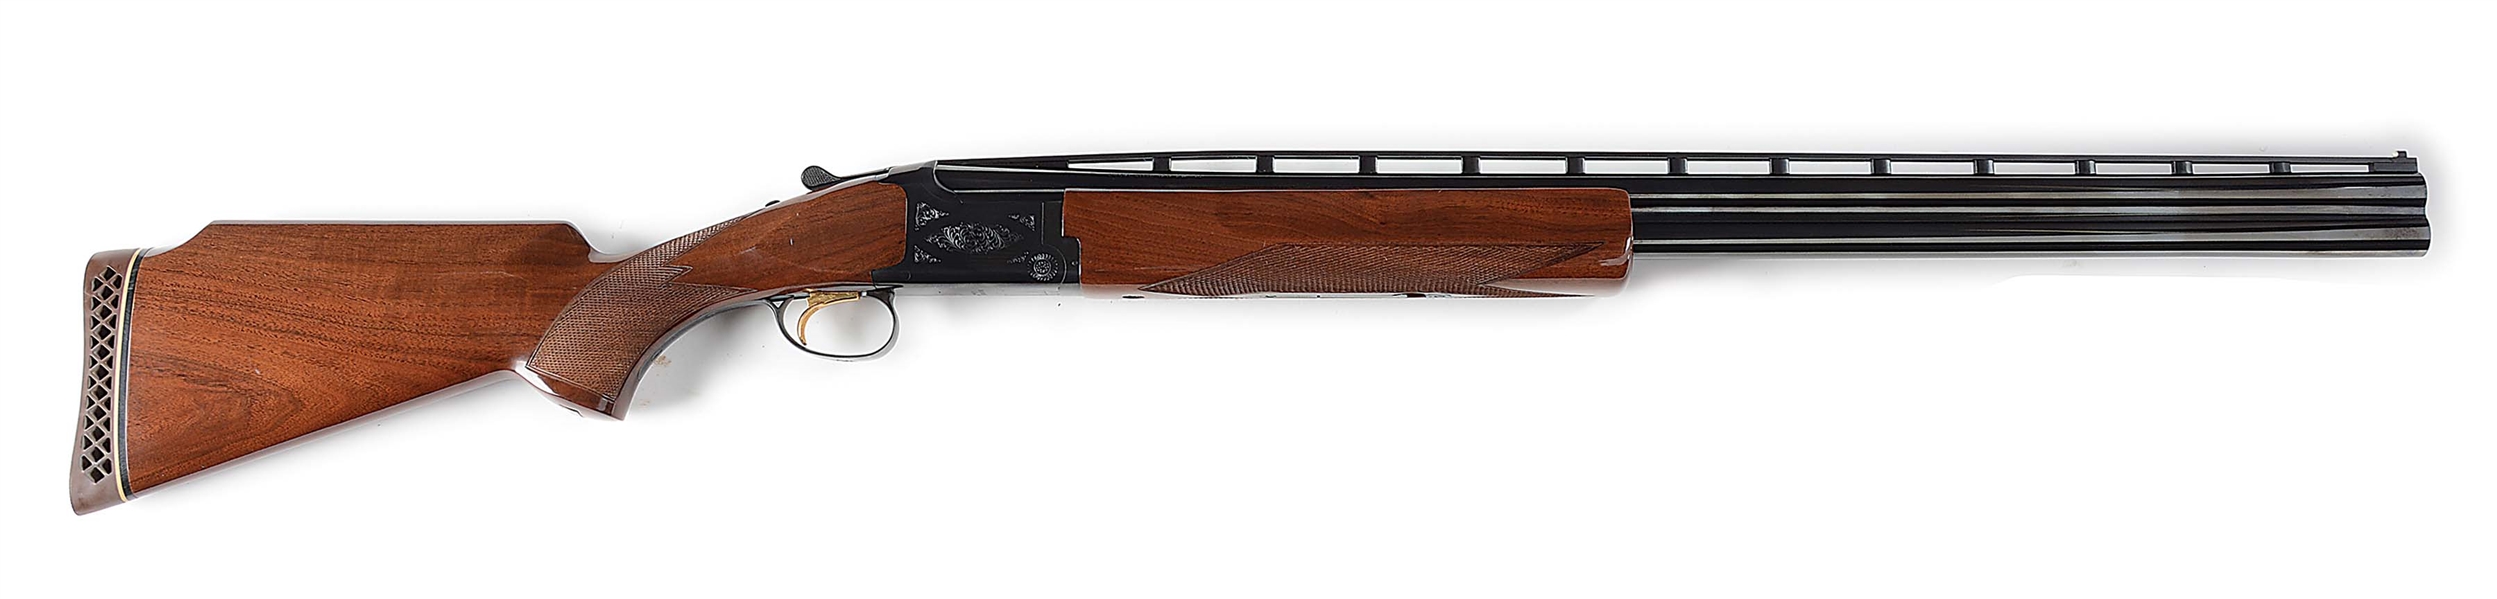 (M) CASED BROWNING CITORI OVER-UNDER TRAP SHOTGUN WITH INVECTOR CHOKES 